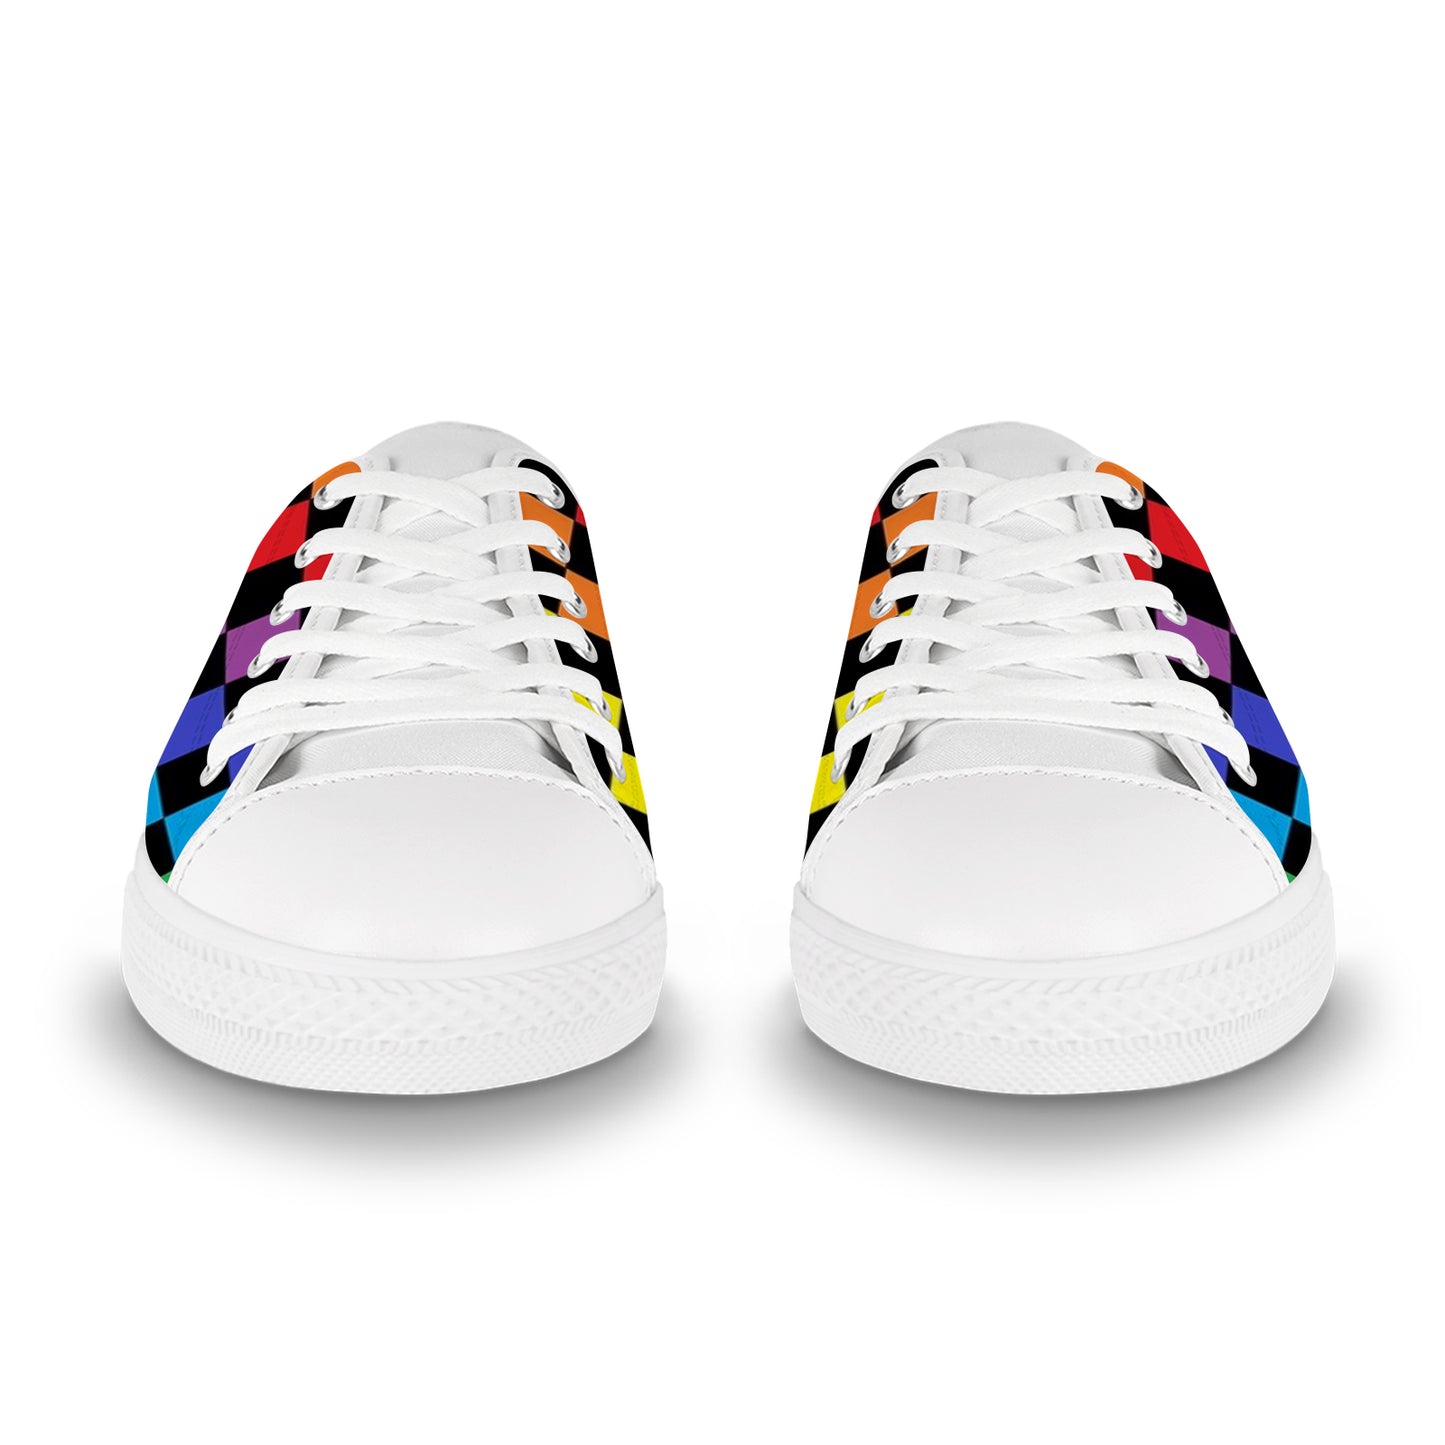 Women's Canvas Sneakers - Rainbow Checkered